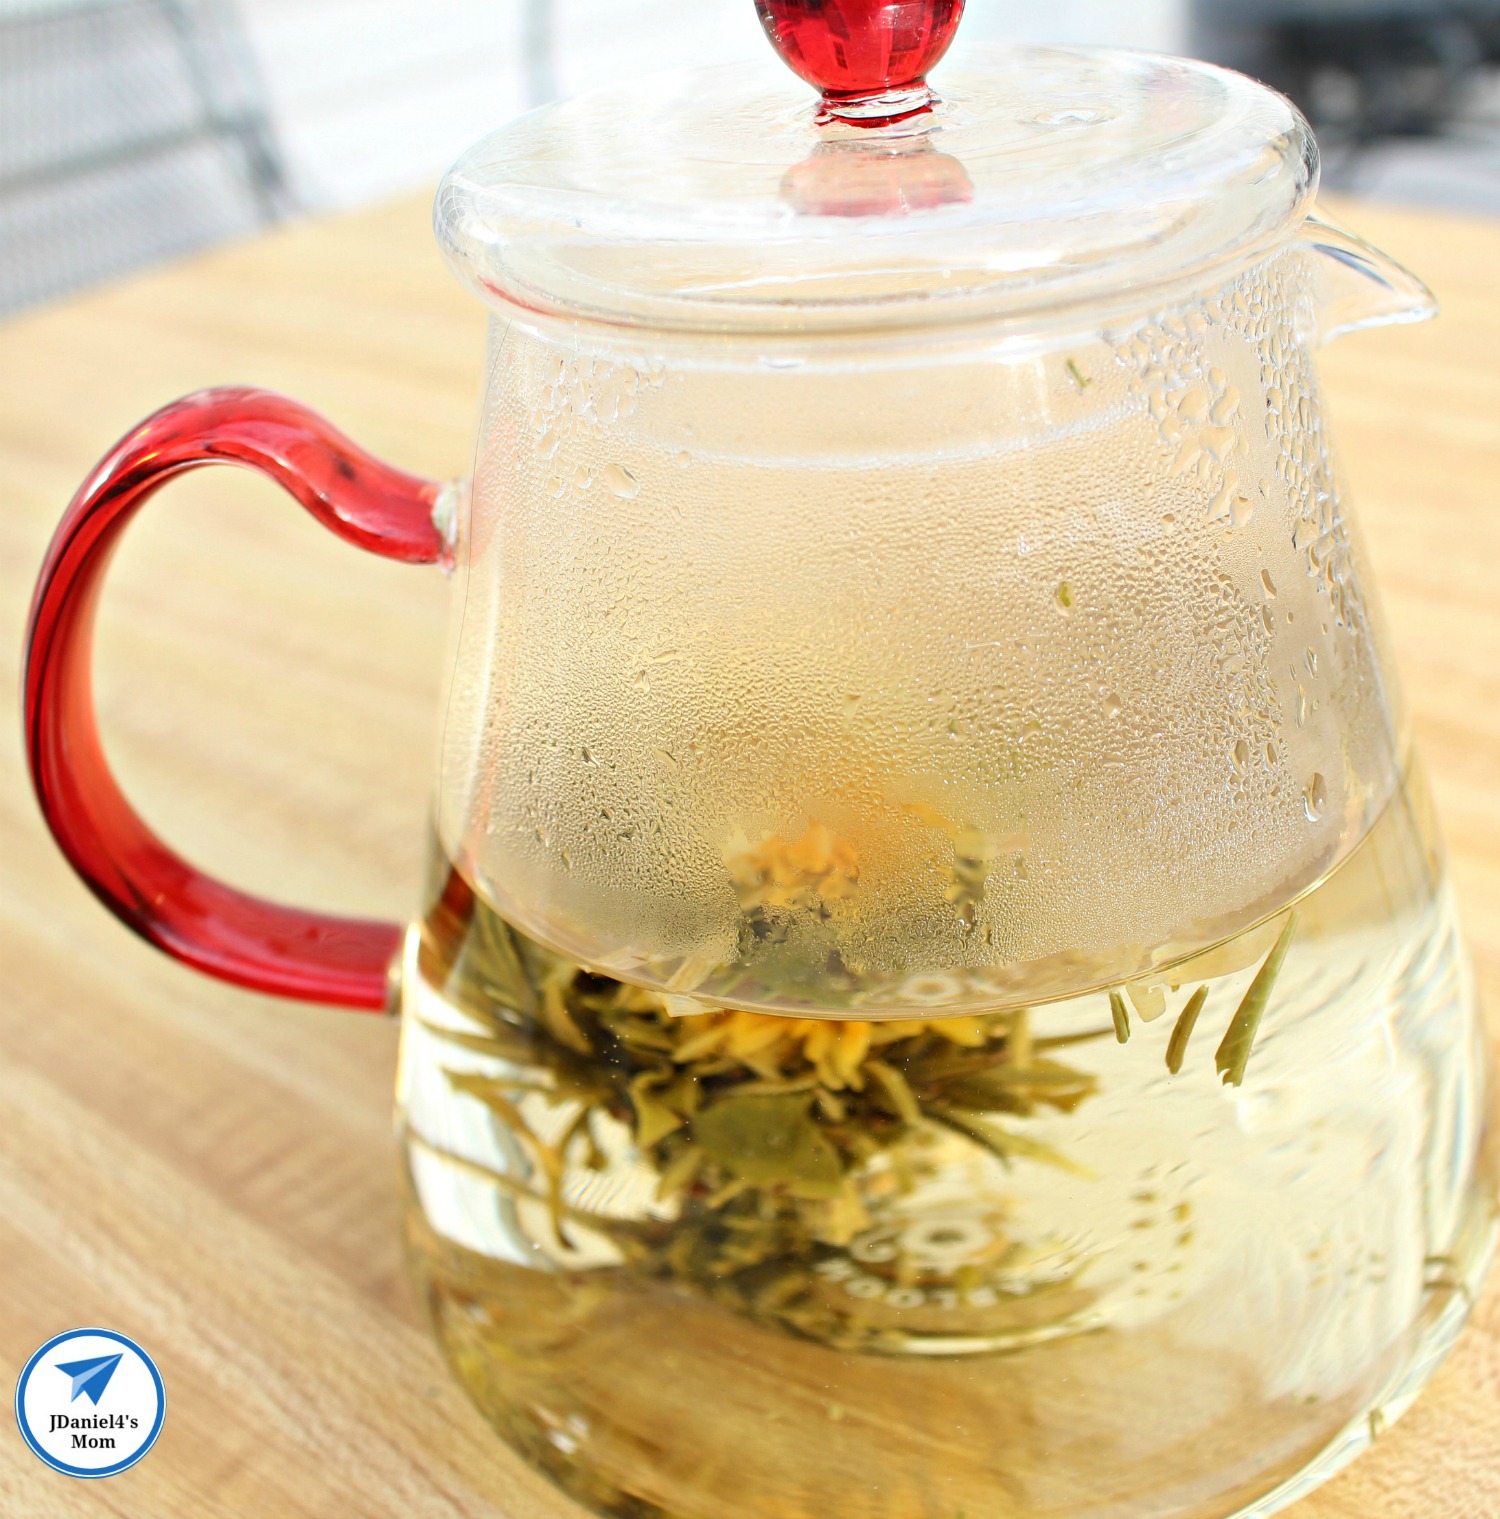 Using Your Senses to Explore Infused Water- Teabloom Flower Blooming in the Teapot